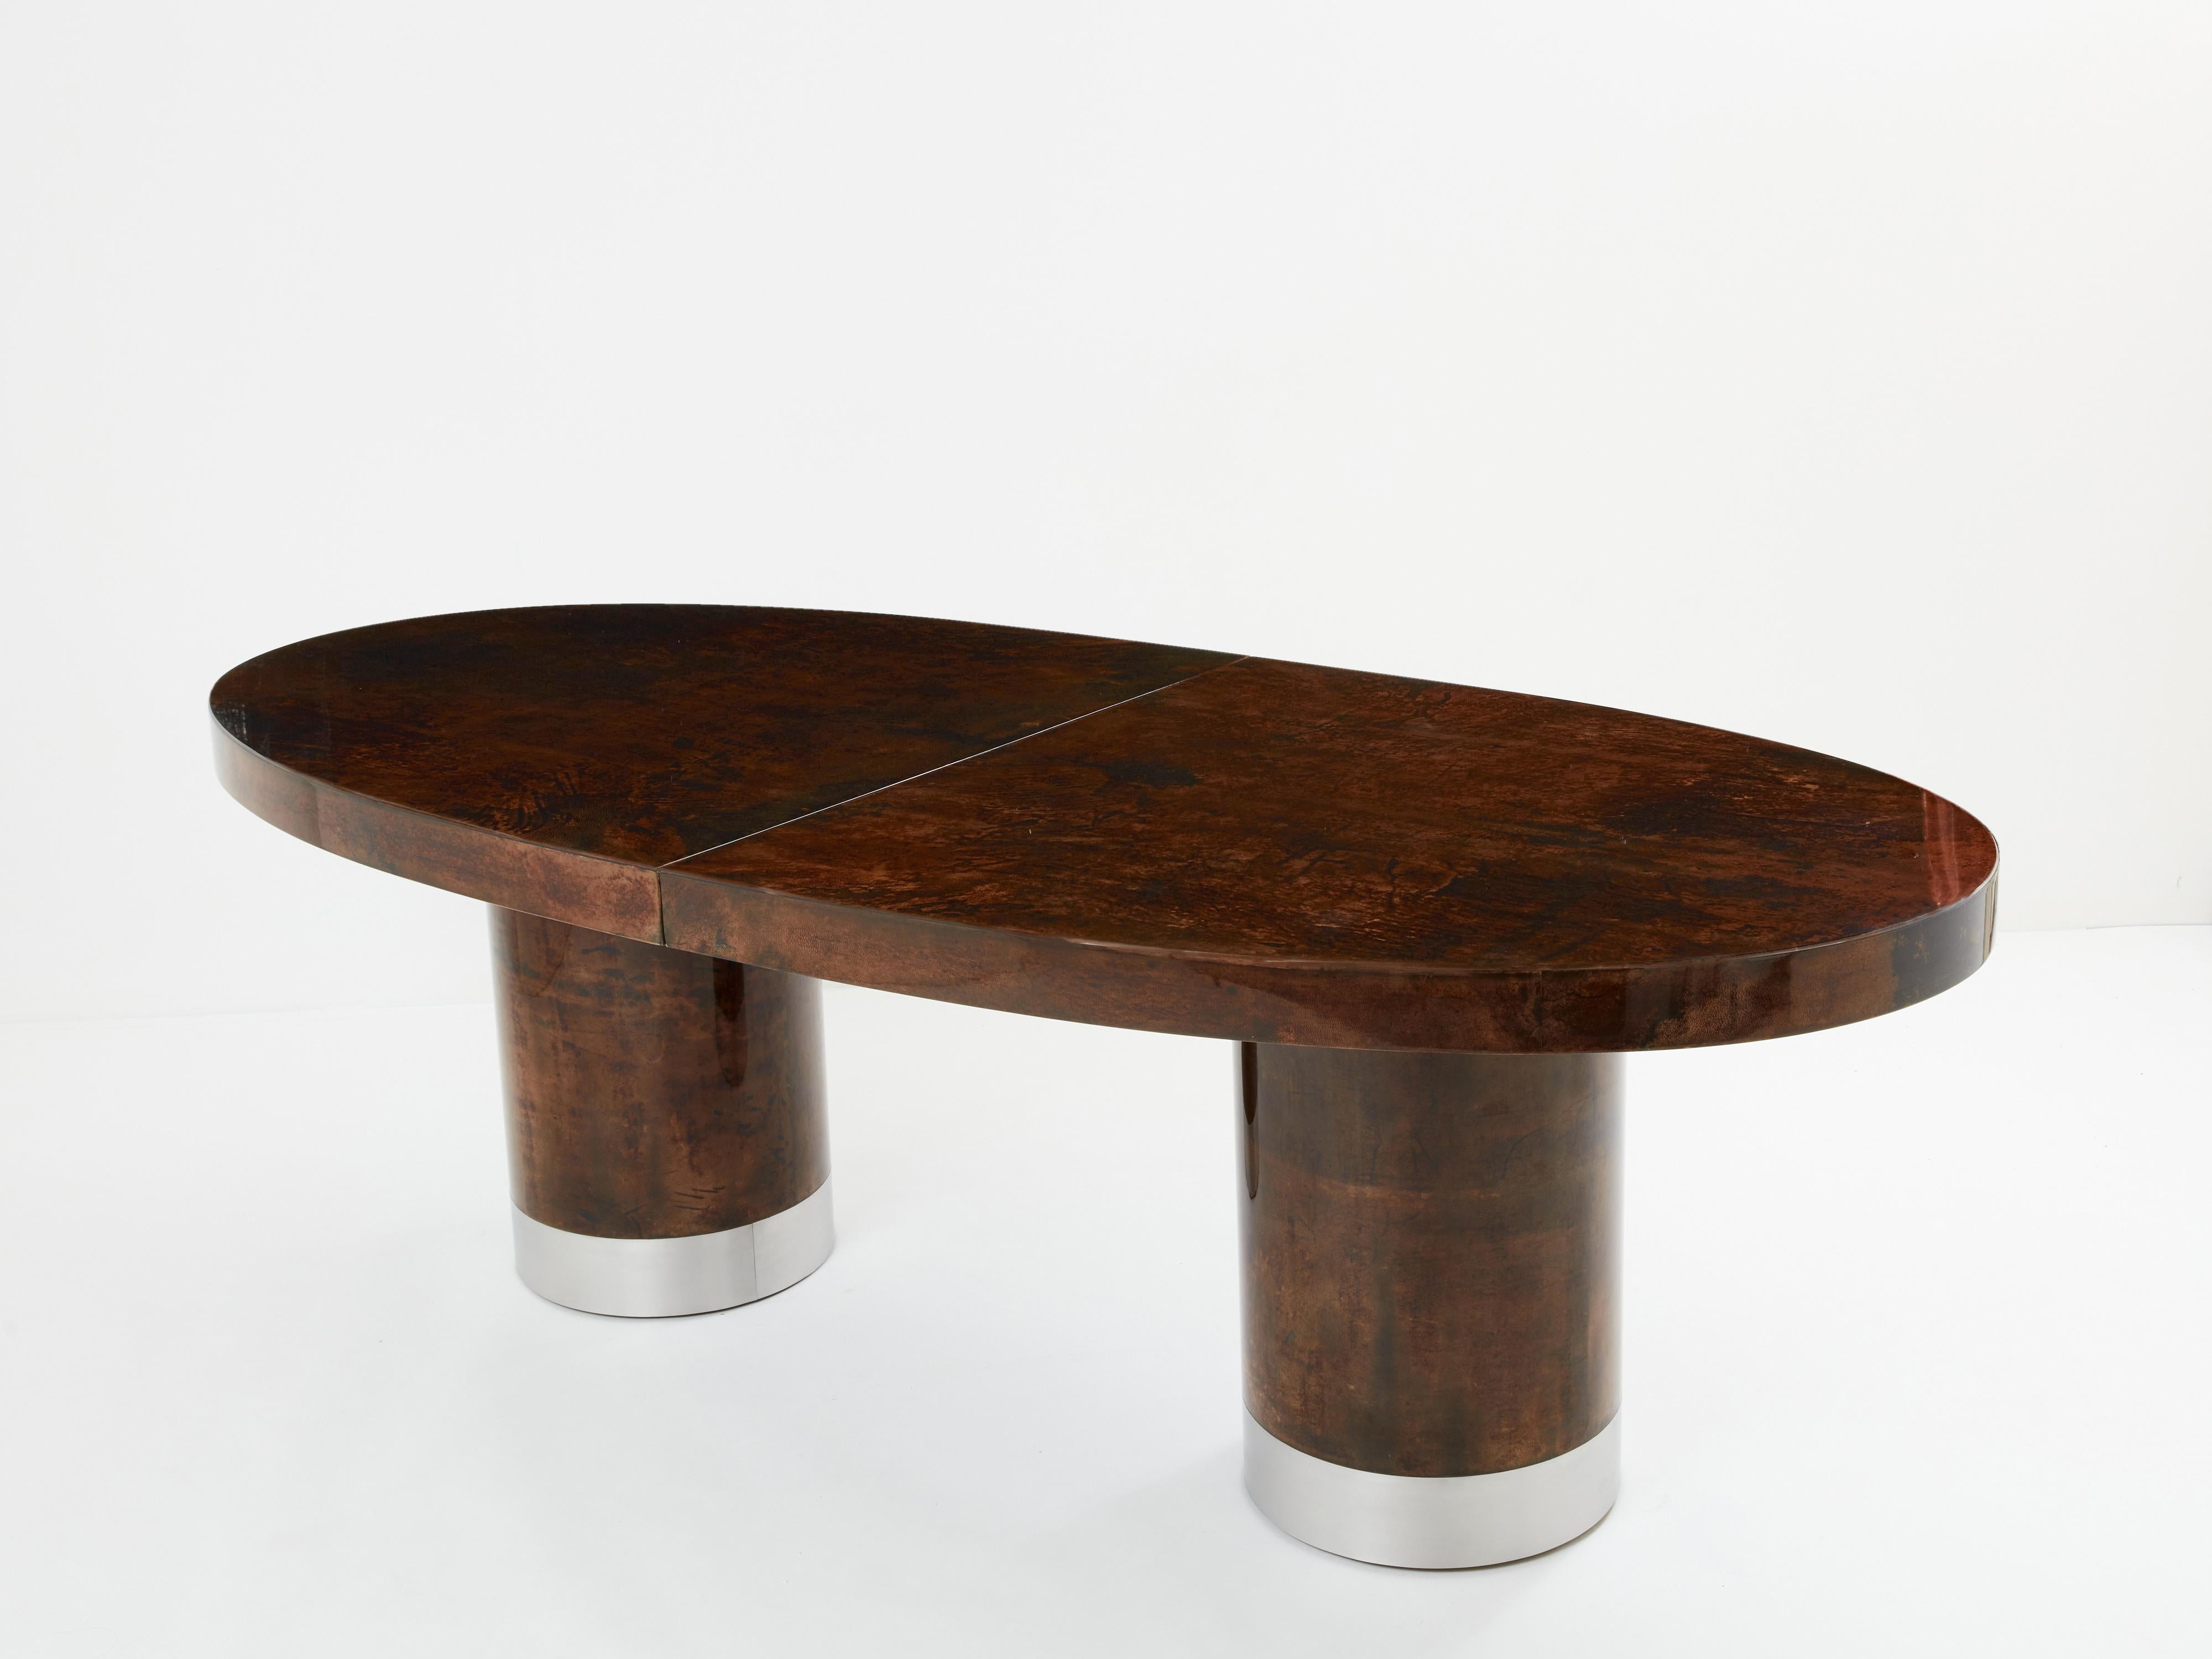 This unique Aldo Tura dining table was produced in Italy in the late 1960s, and really feels imposing and glamorous. The lacquered goatskin parchment, in rich shades of brown and dark brown, makes this dining table typical of designer Aldo Tura